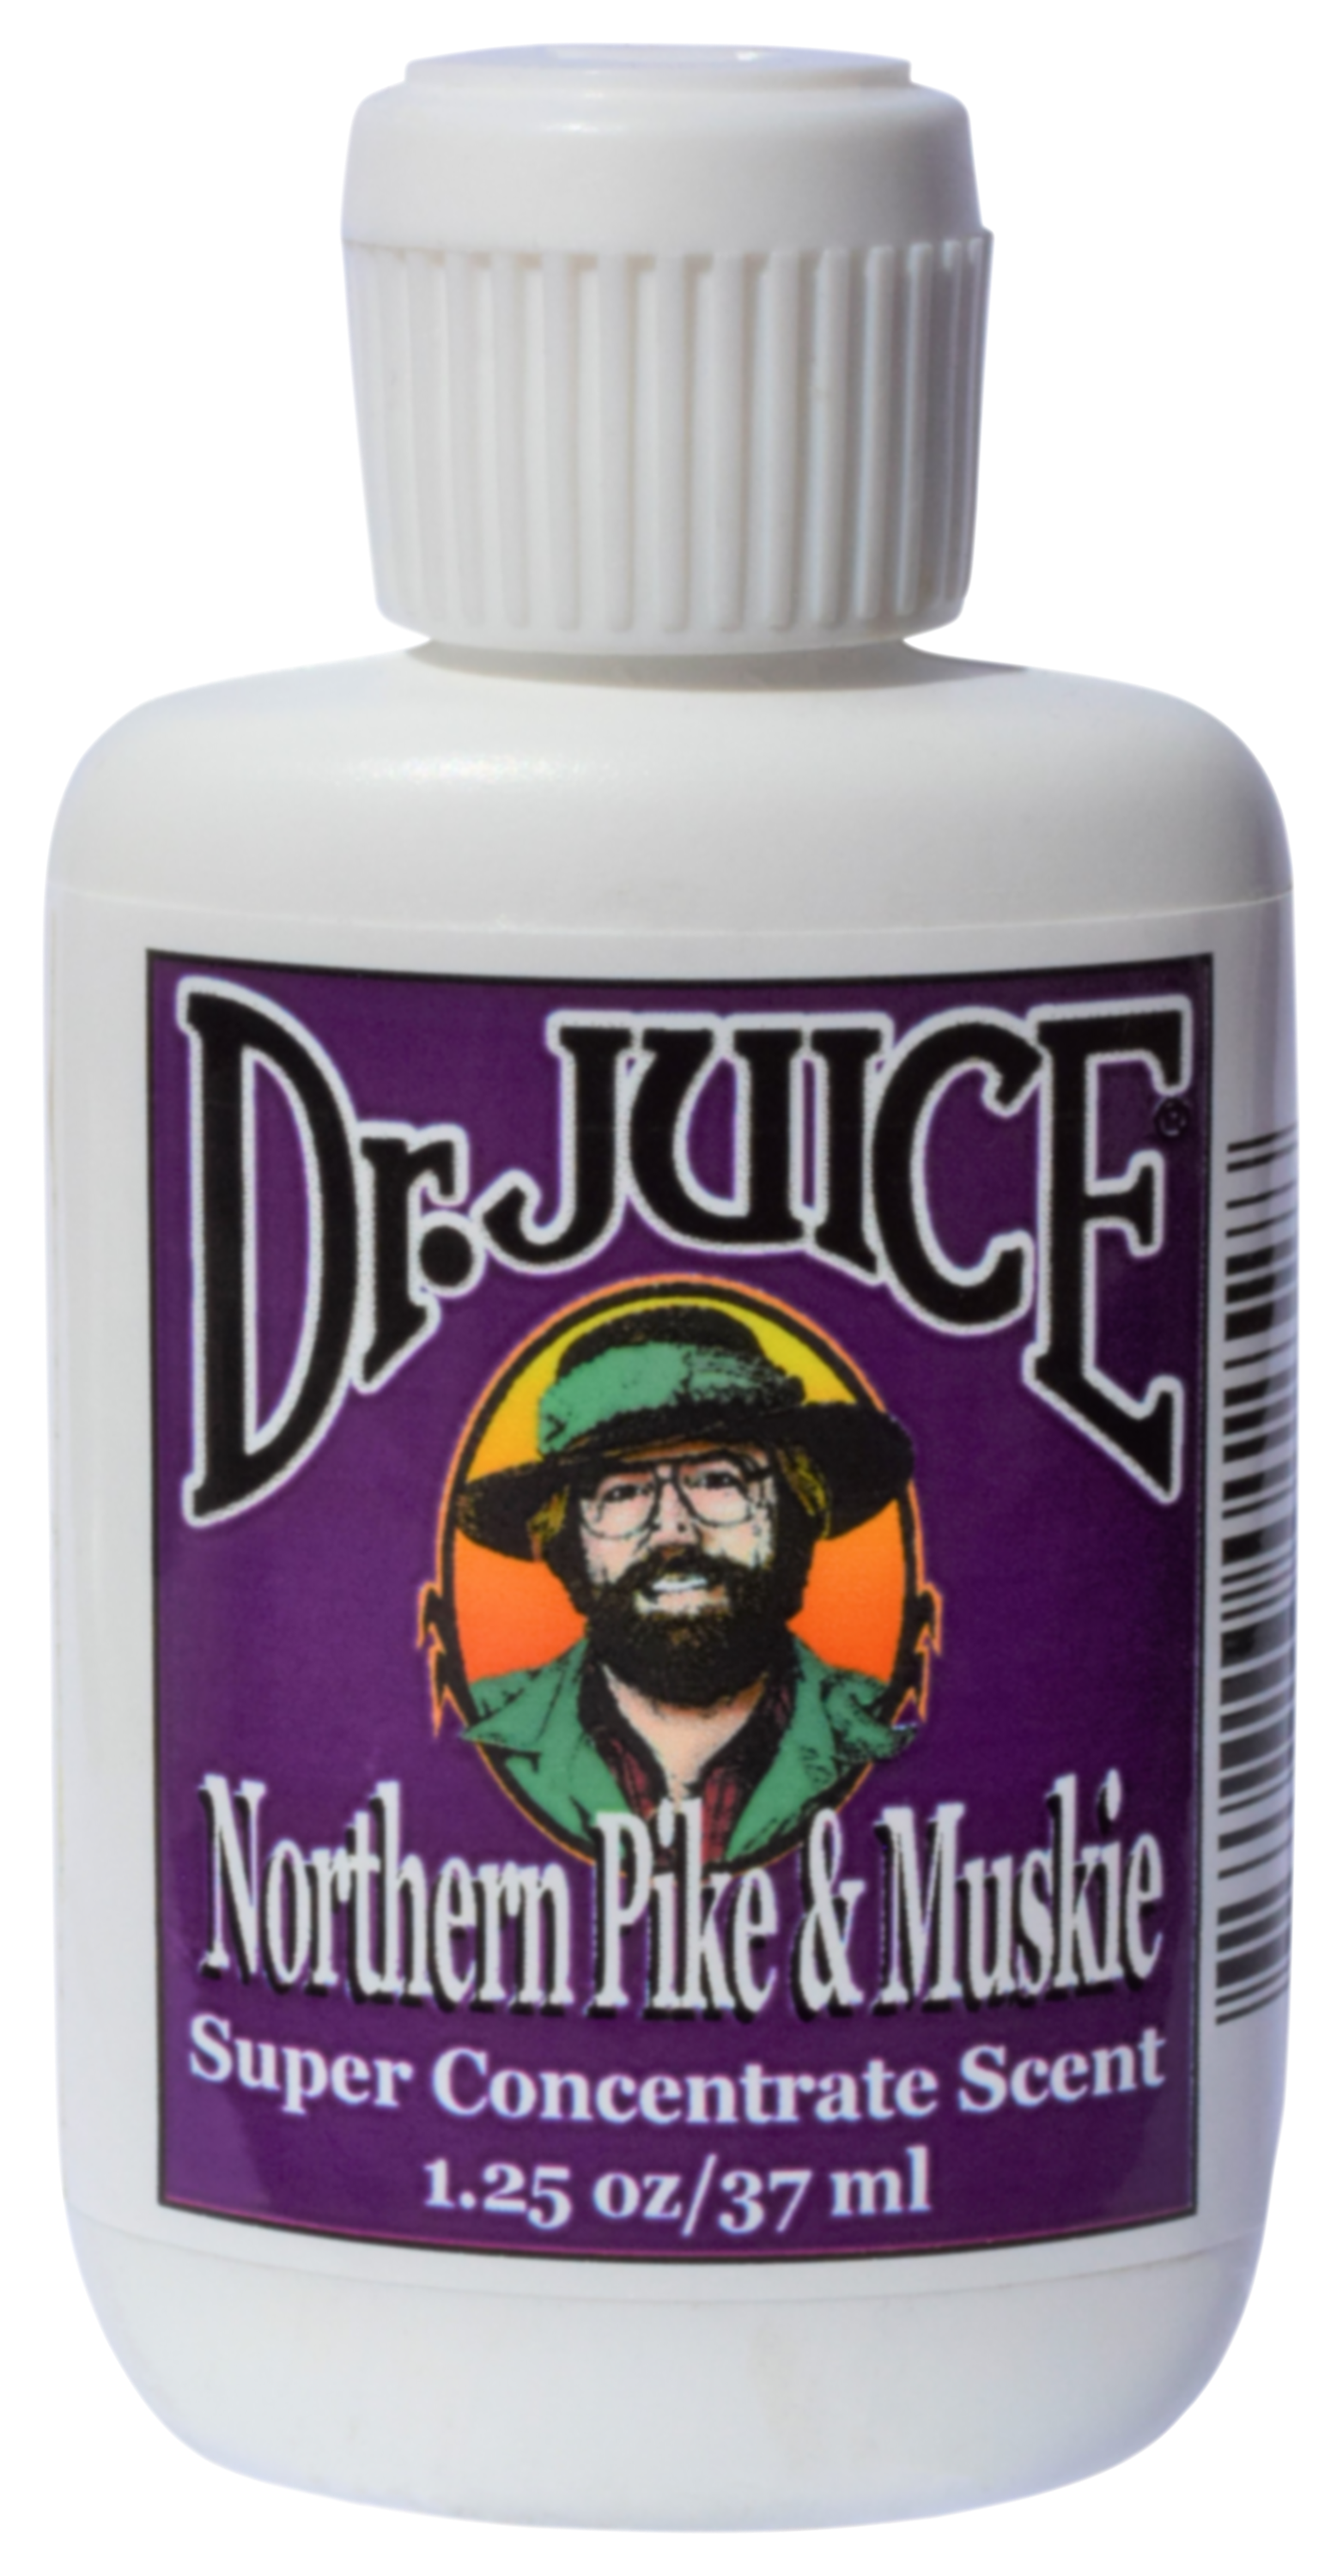 Dr. Juice Super Concentrate Northern Pike & Muskie Scent